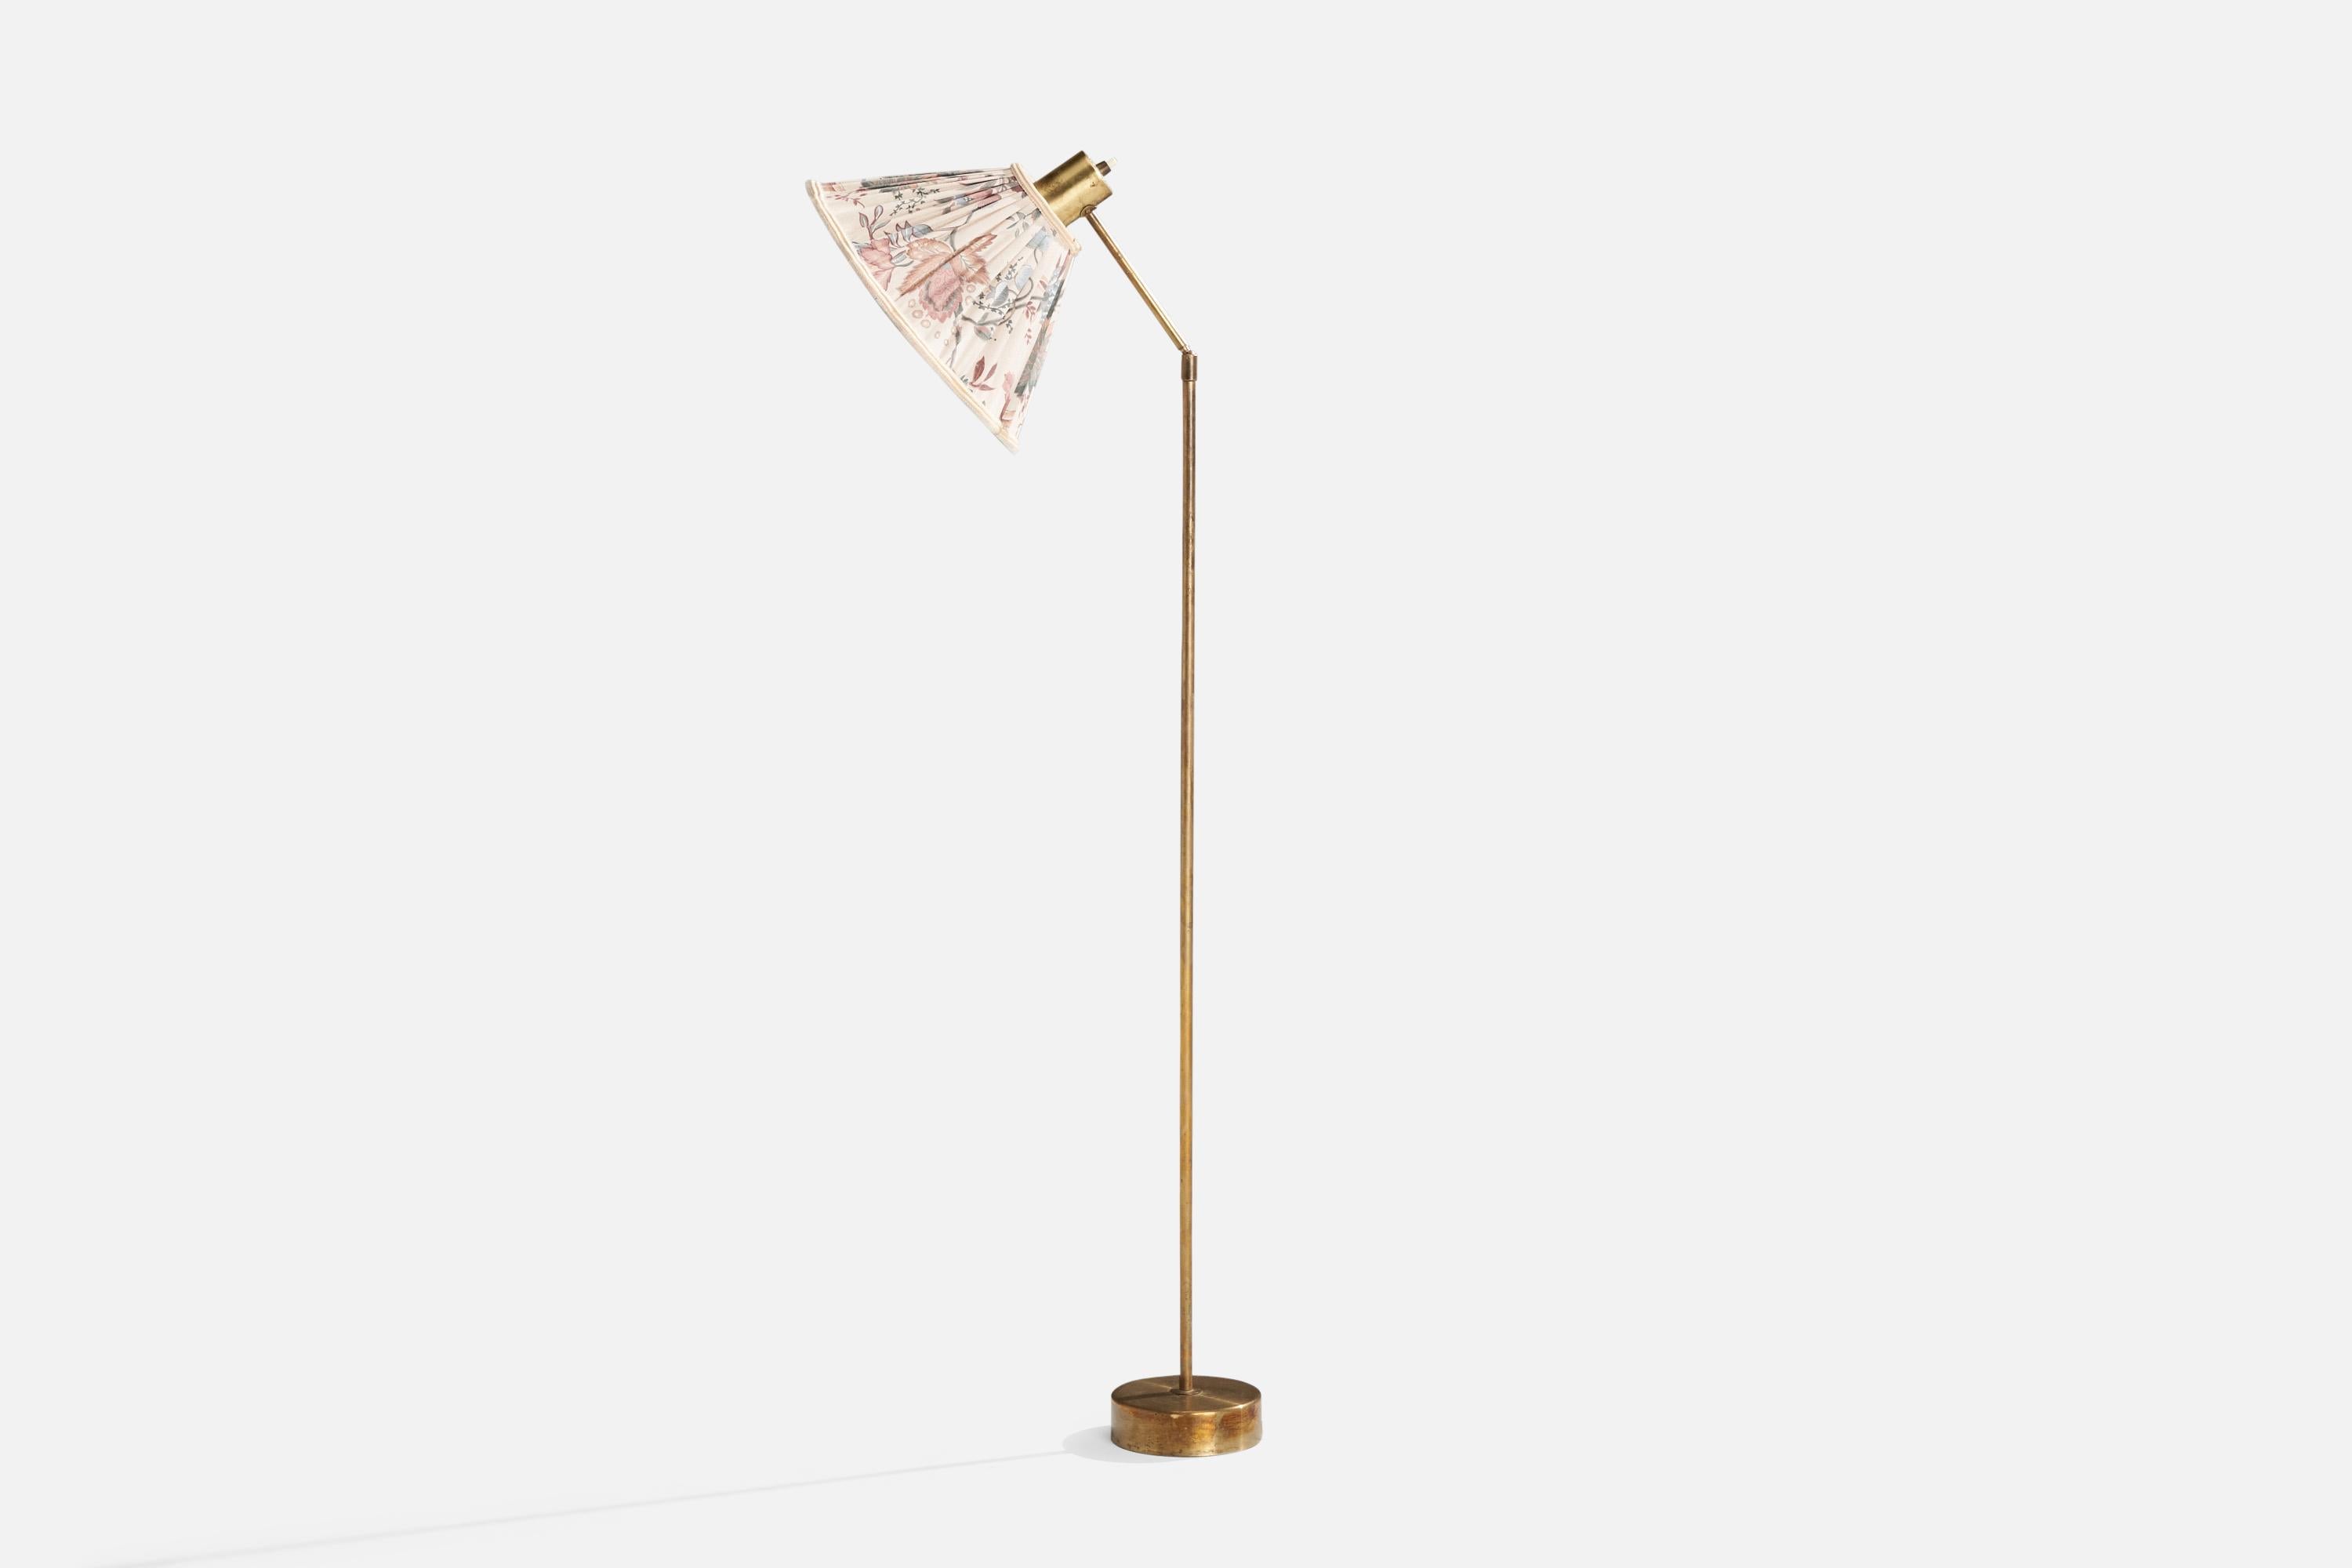 An adjustable brass and fabric floor lamp designed by Hans Bergström and produced by ASEA, Sweden, 1940s.

Dimensions variable.

Vintage fabric lampshade in fair condition. With stains present.
Overall Dimensions (inches): 43.375” H x 11.75” W x